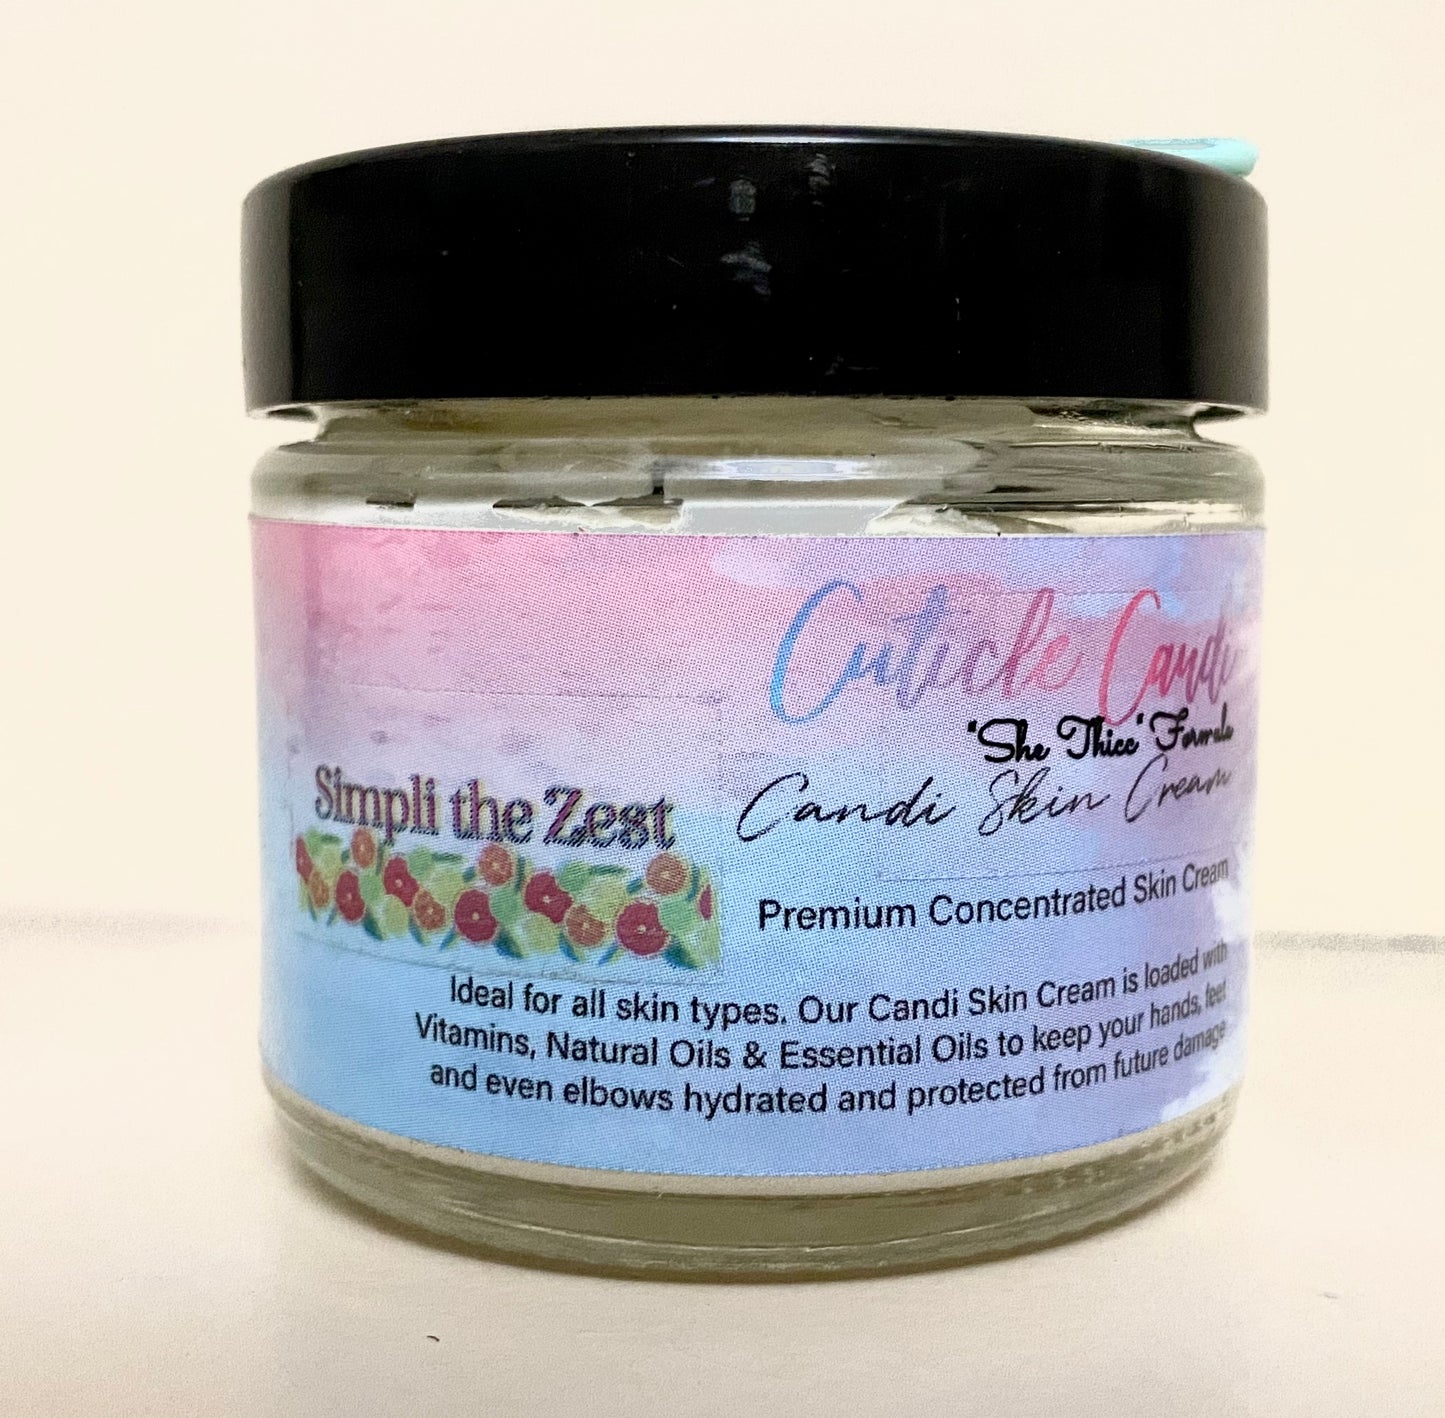 Simpli The Zest Premium Concentrated Skin Cream (She Thicc version) by Candi Skin Care